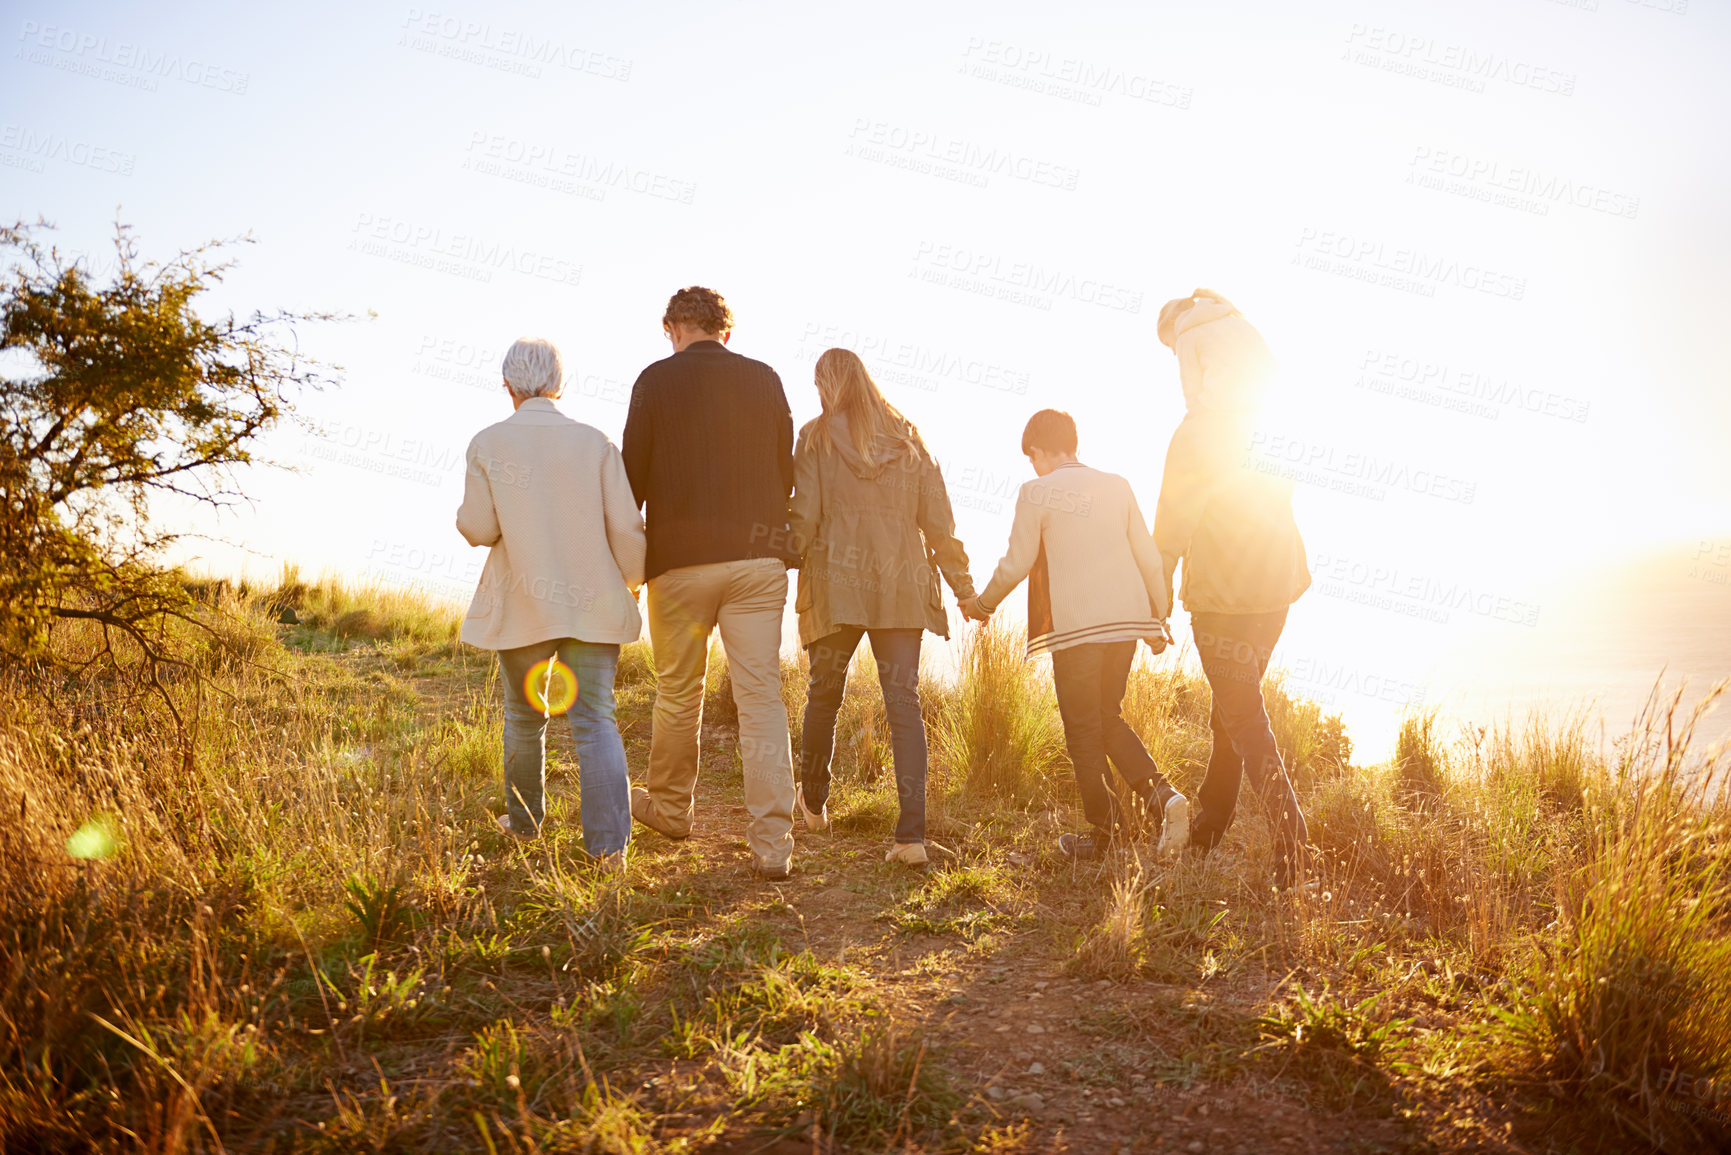 Buy stock photo Rearview shot of a multi-generational family walking together at sunset